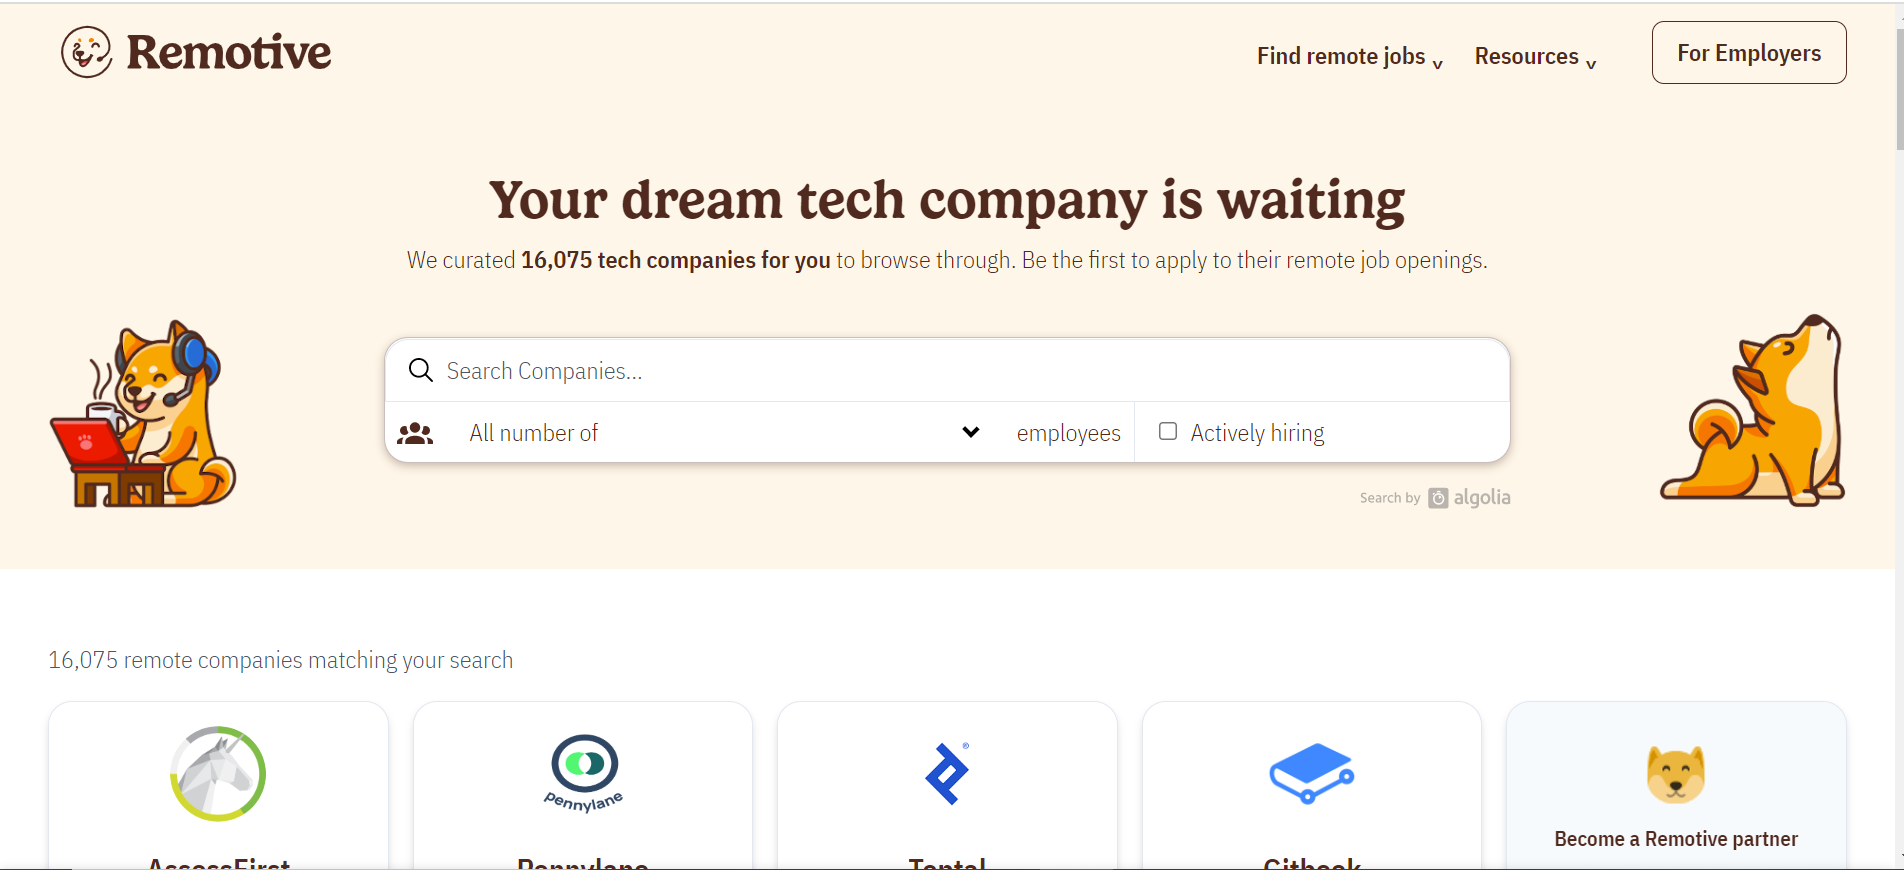 2,500+ Companies Hiring Remotely in 2020